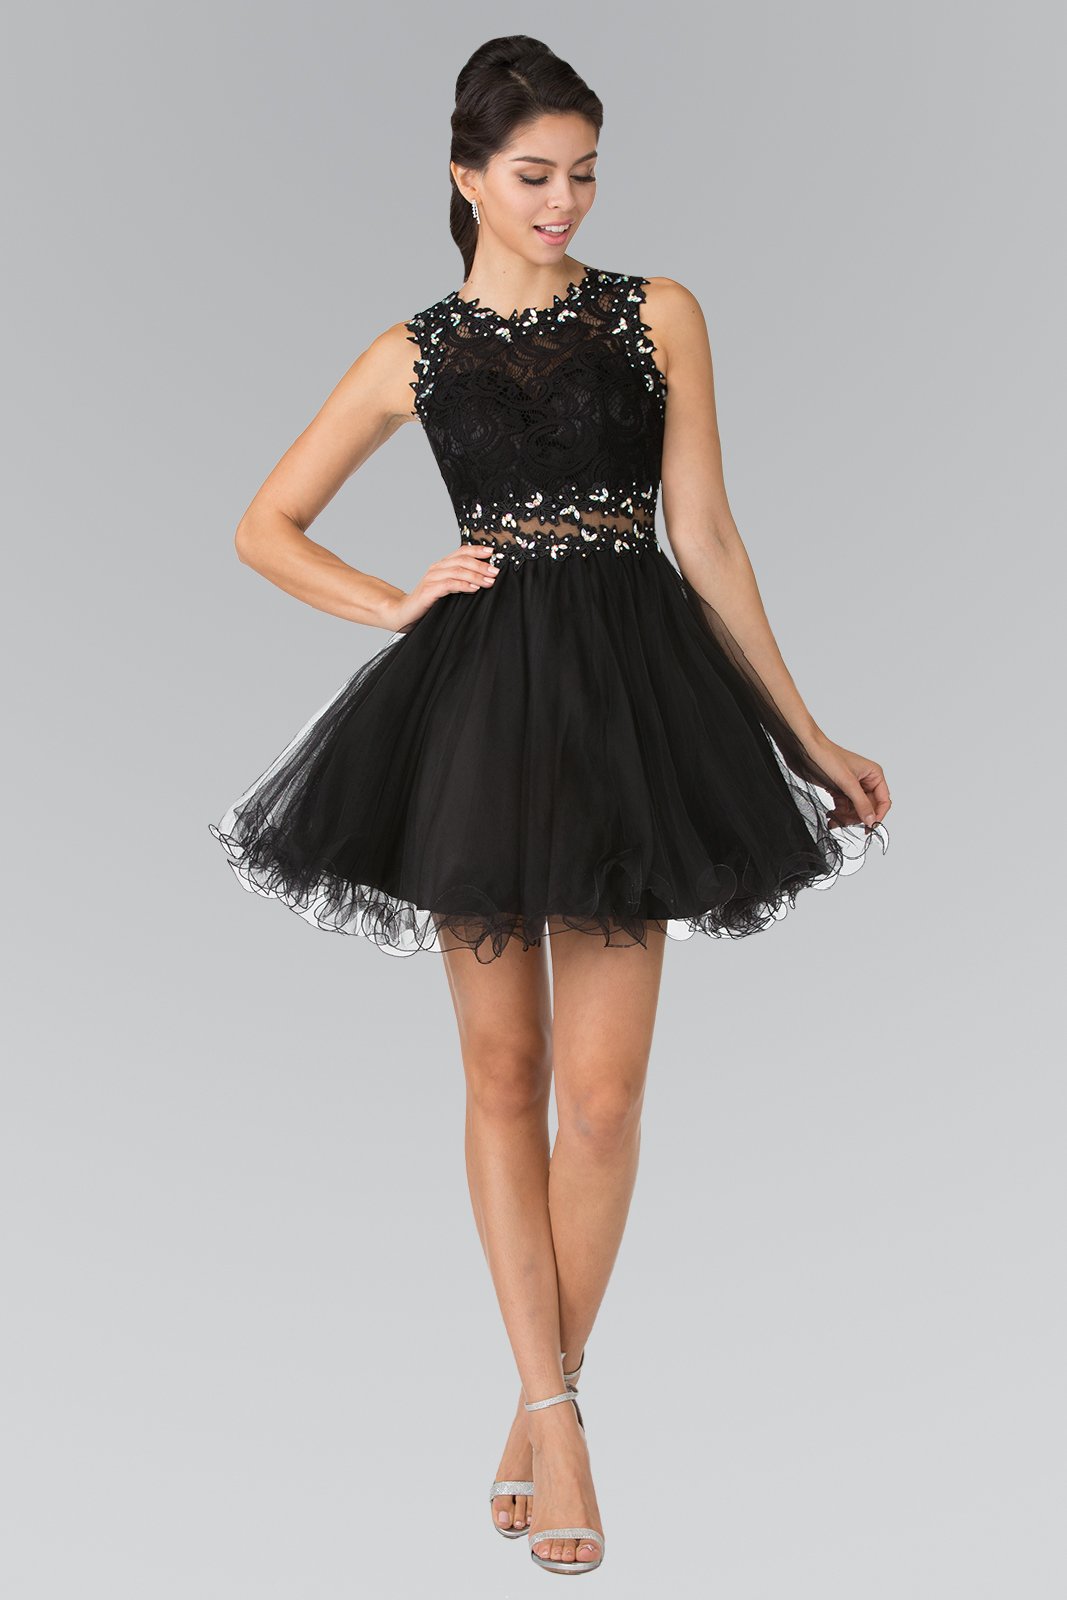 gs1427-black-1-short-homecoming-cocktail-bridesmaids-damas-lace-tulle-covered-back-zipper-sleeveless-crew-neck-babydoll (1).jpg